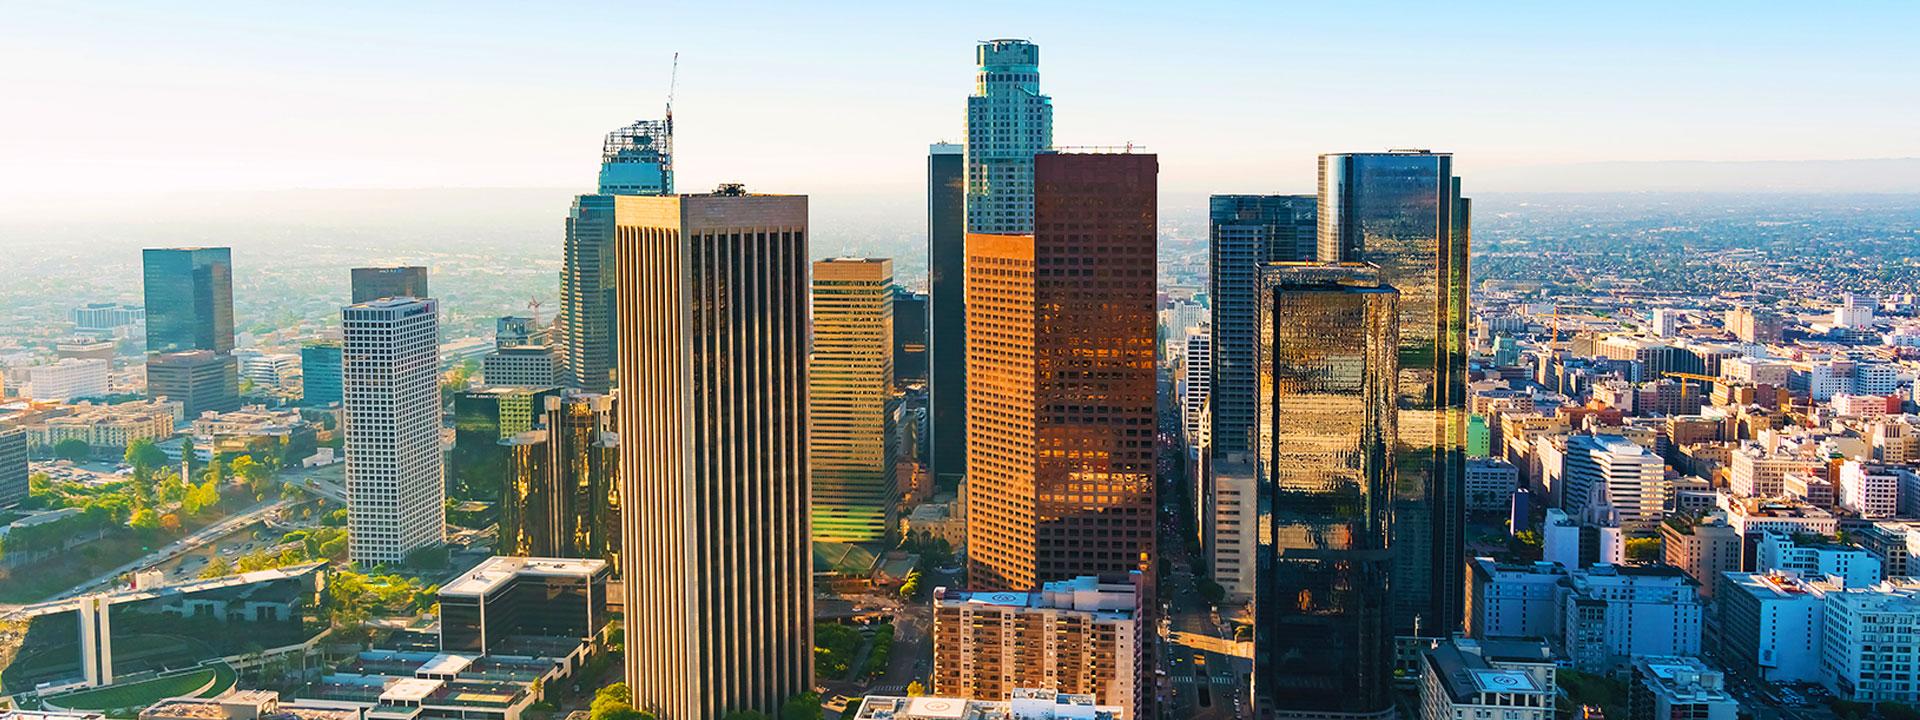 Downtown LA with skyscrapers